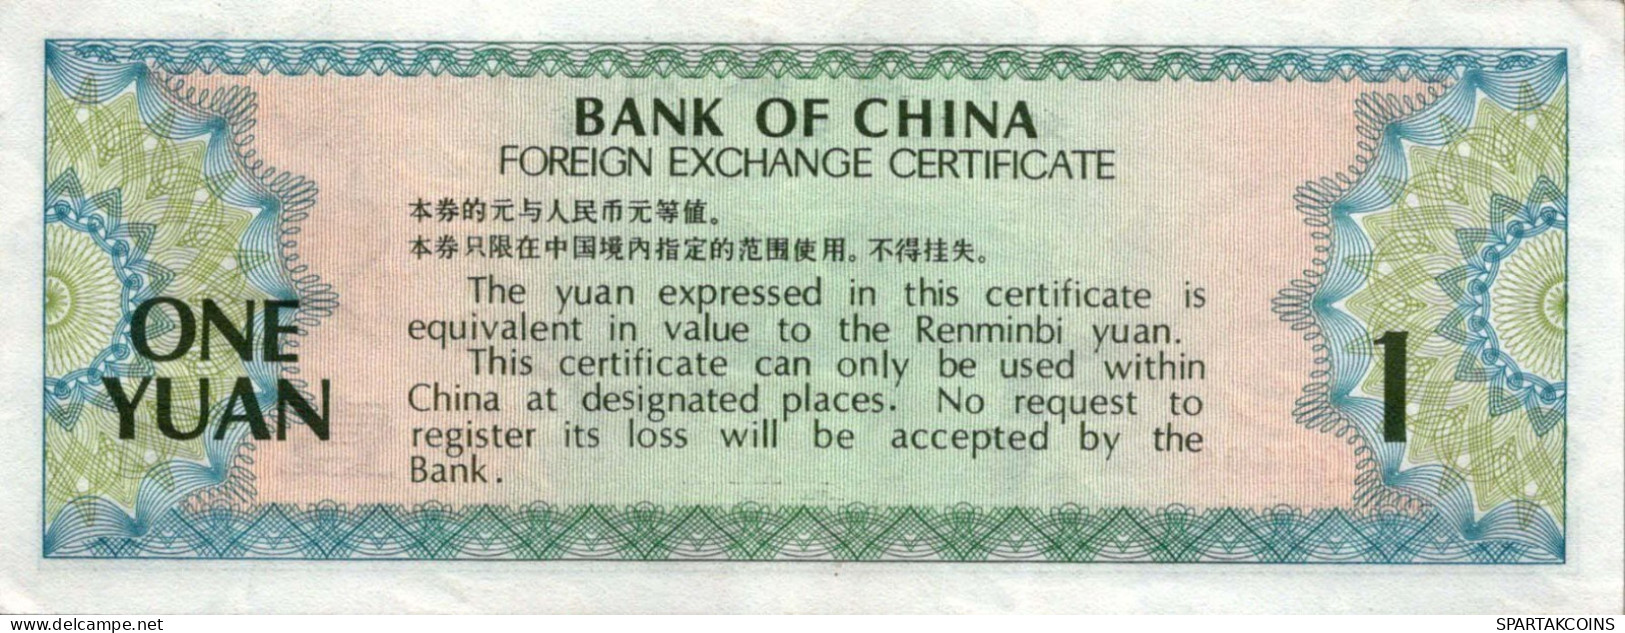 1 YUAN 1979 CHINESISCH Papiergeld Banknote #PJ362 - [11] Local Banknote Issues